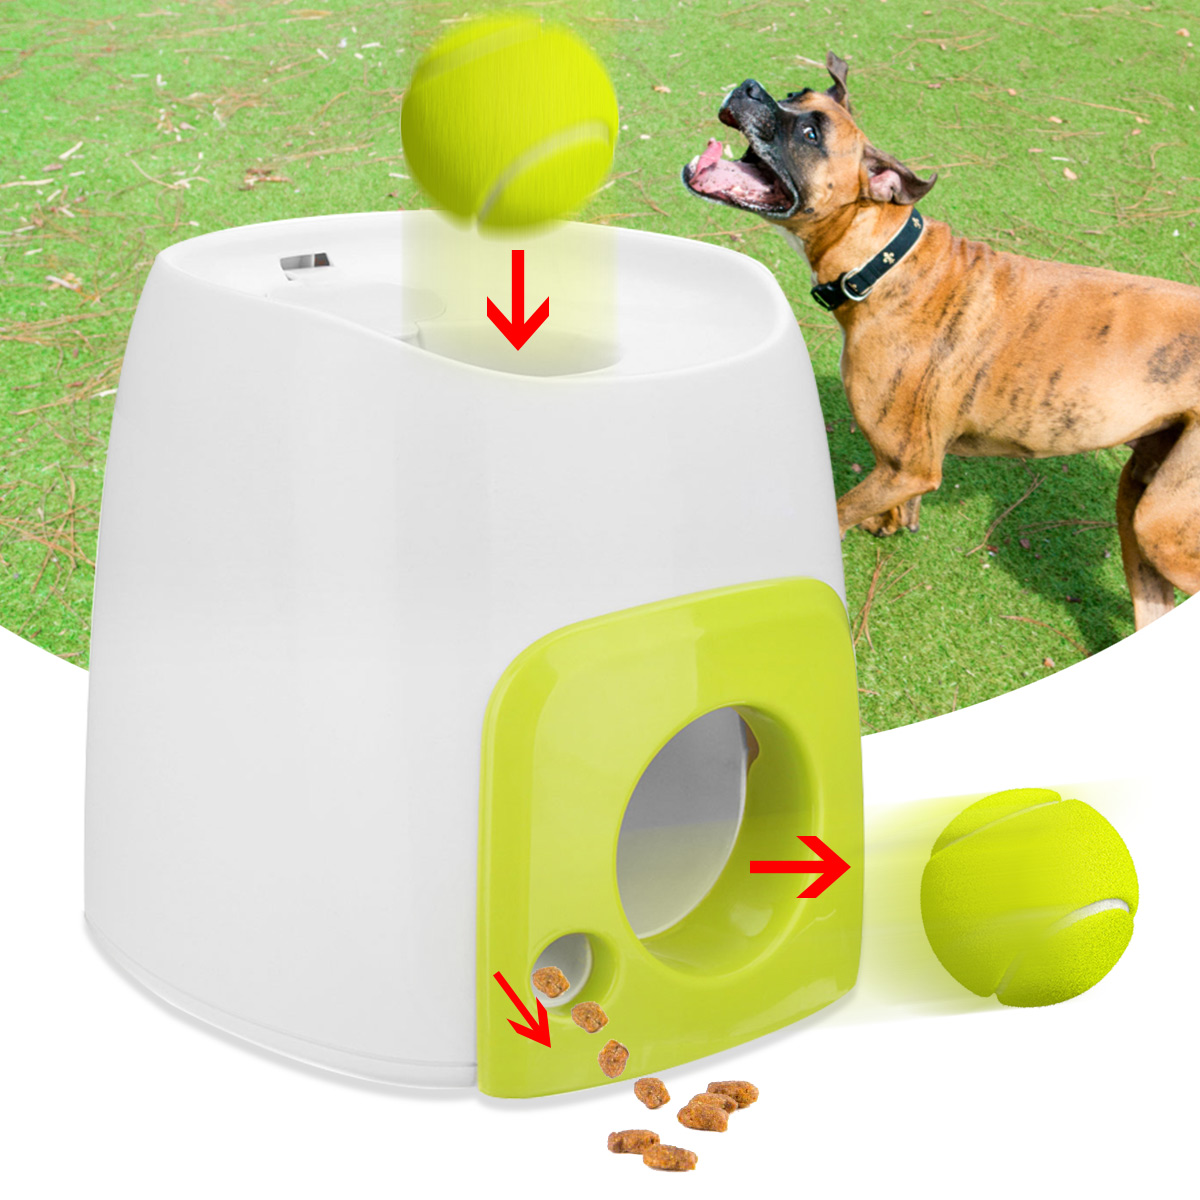 automatic tennis ball thrower for dogs